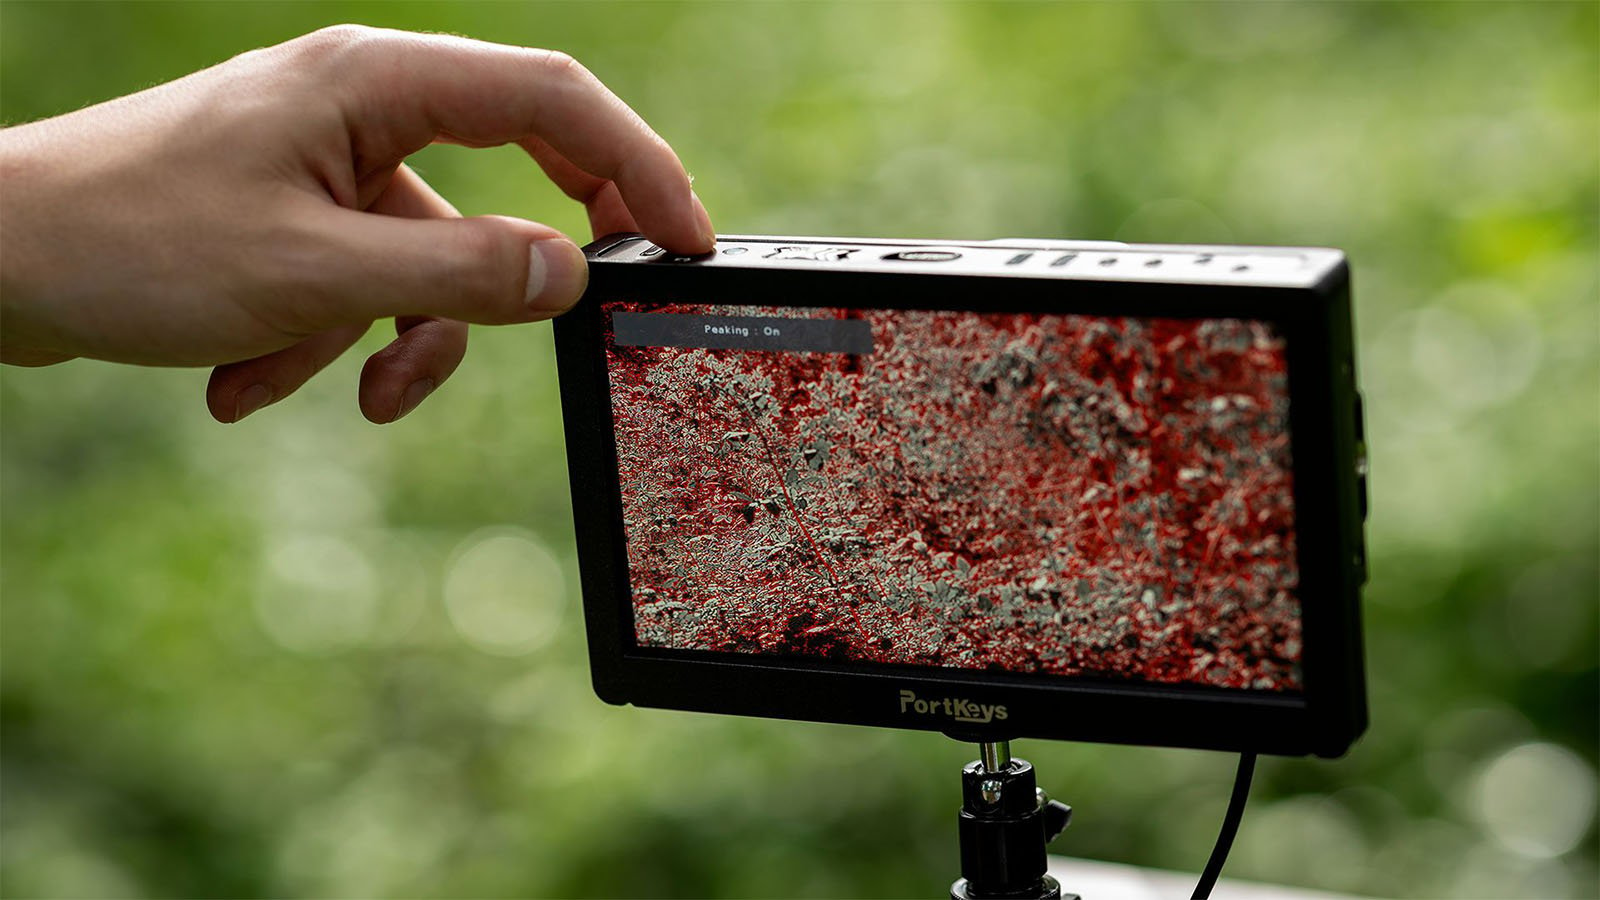 A hand adjusts the settings on a PortKeys camera monitor mounted on a stand. The screen displays a zoomed-in, grainy, red image with the text "Peaking... On" visible. The background is blurred greenery.